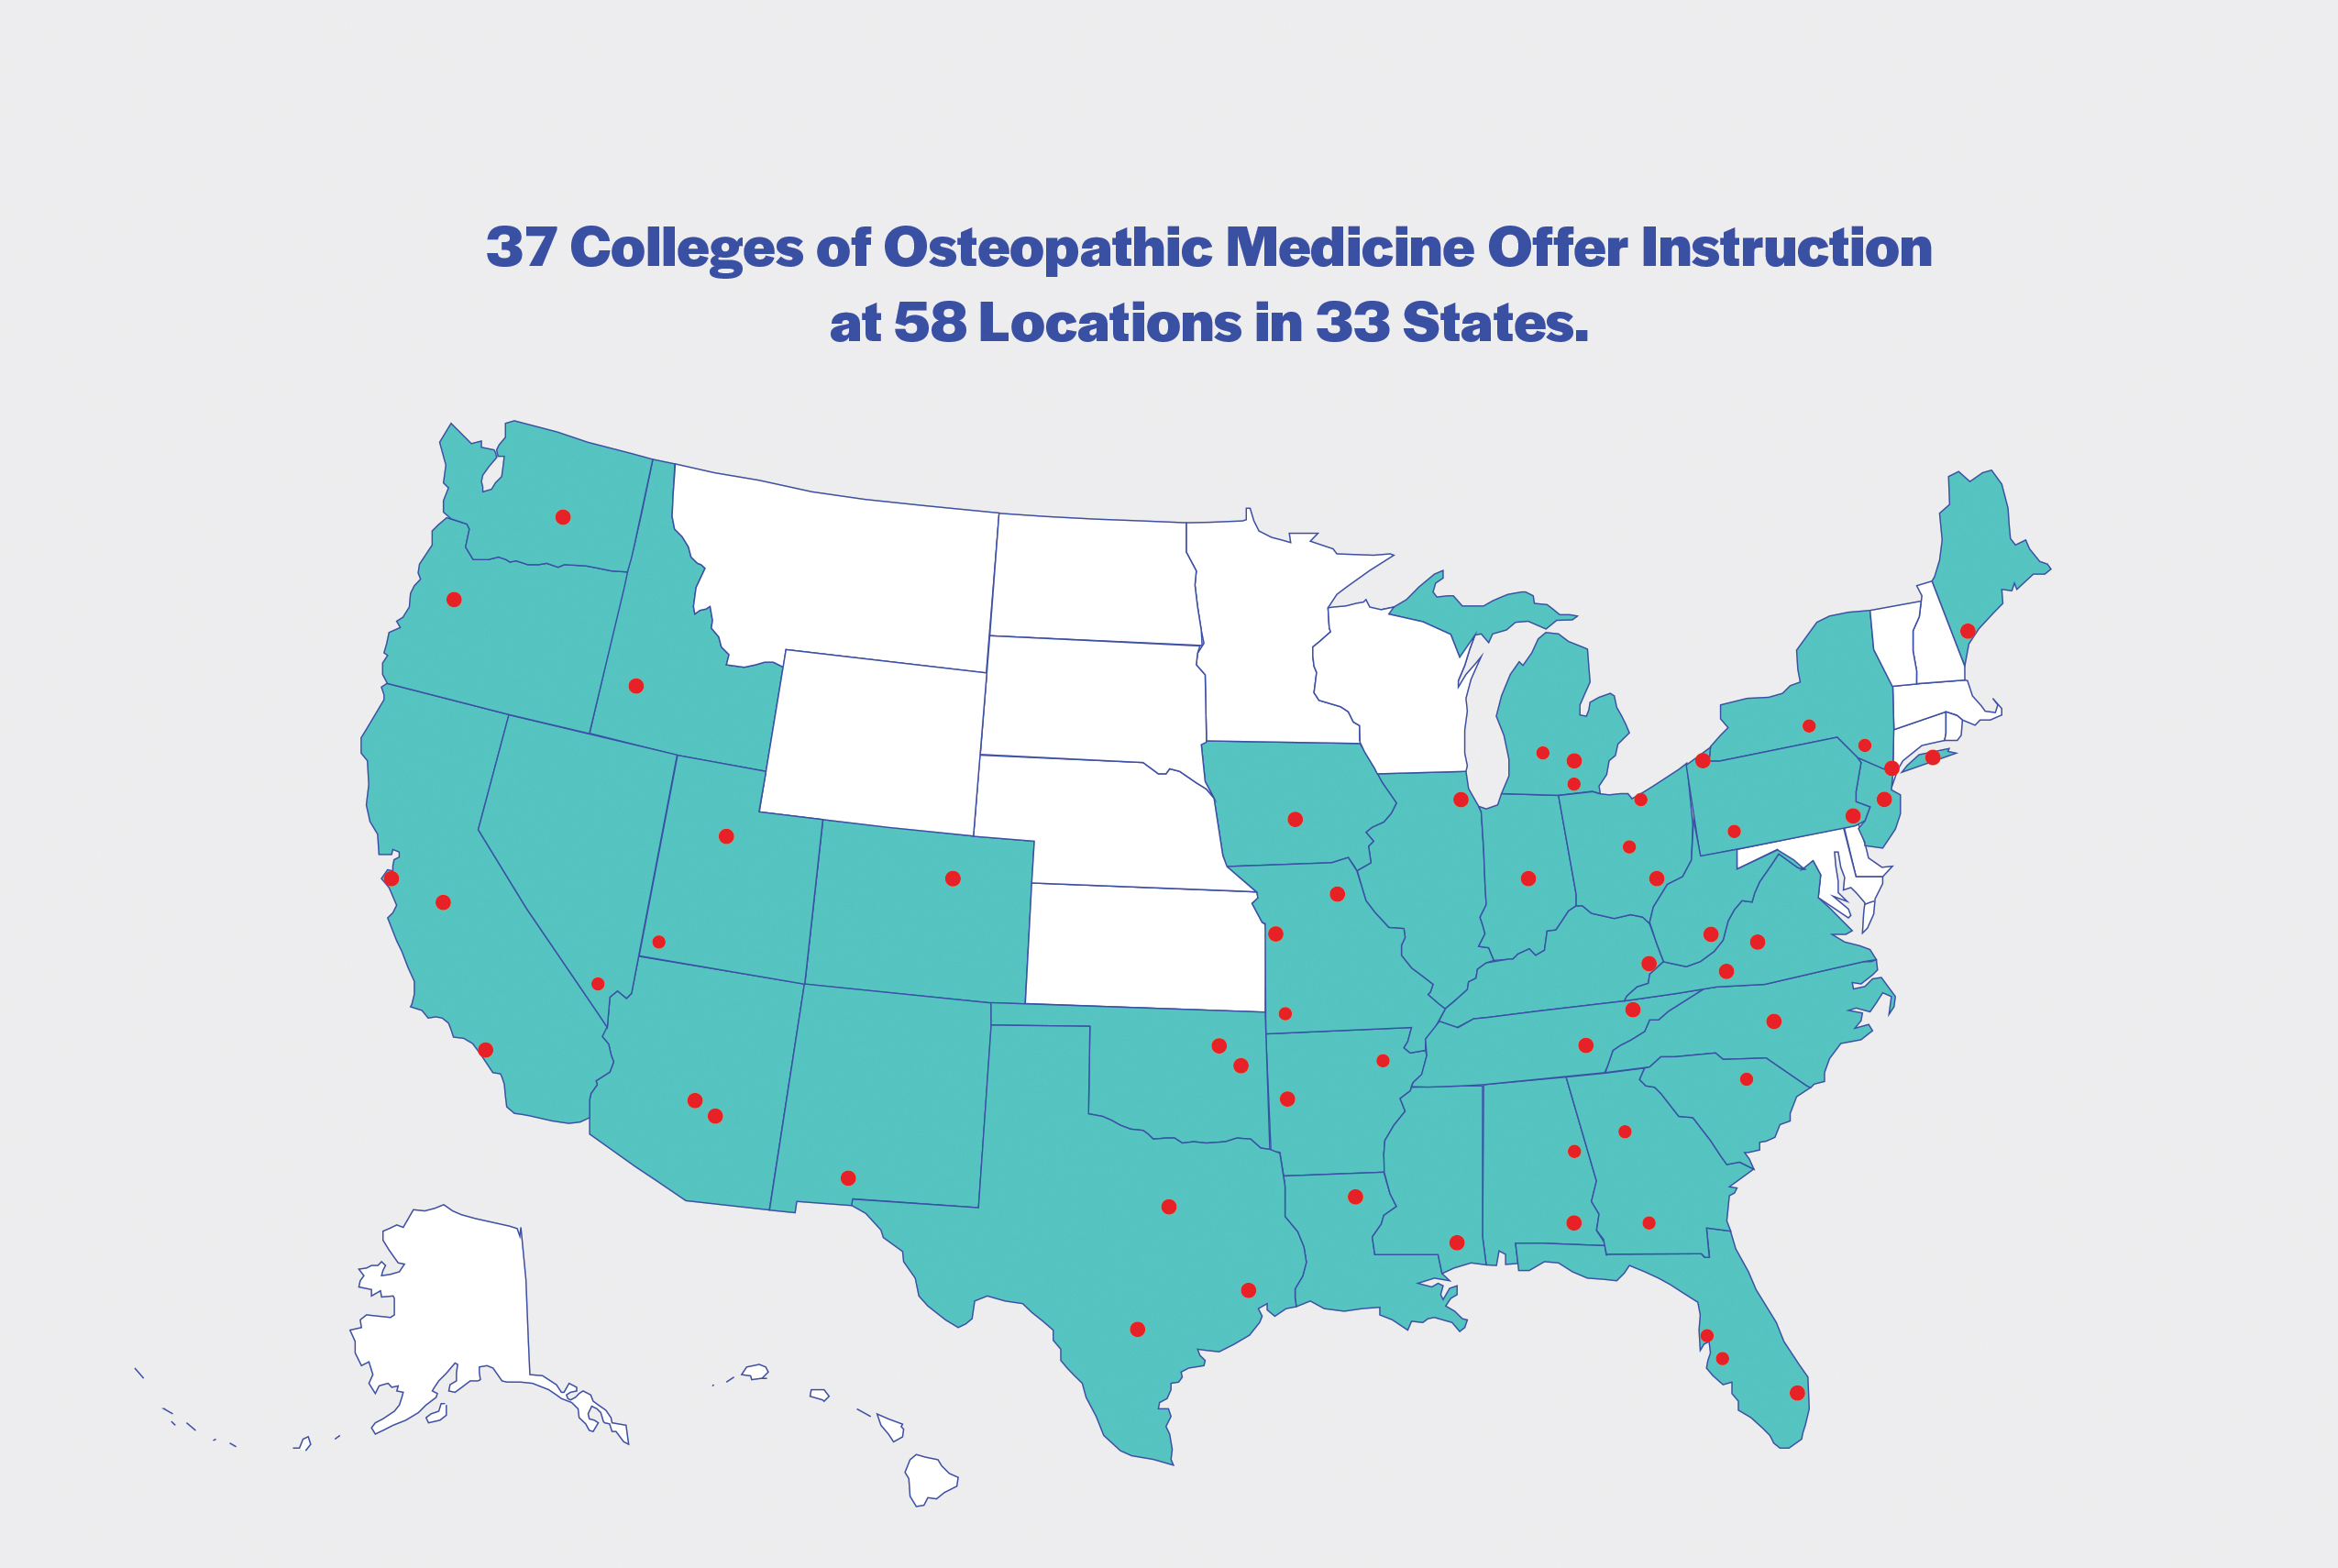 Map of Colleges of Osteopathic Medicine in the United States